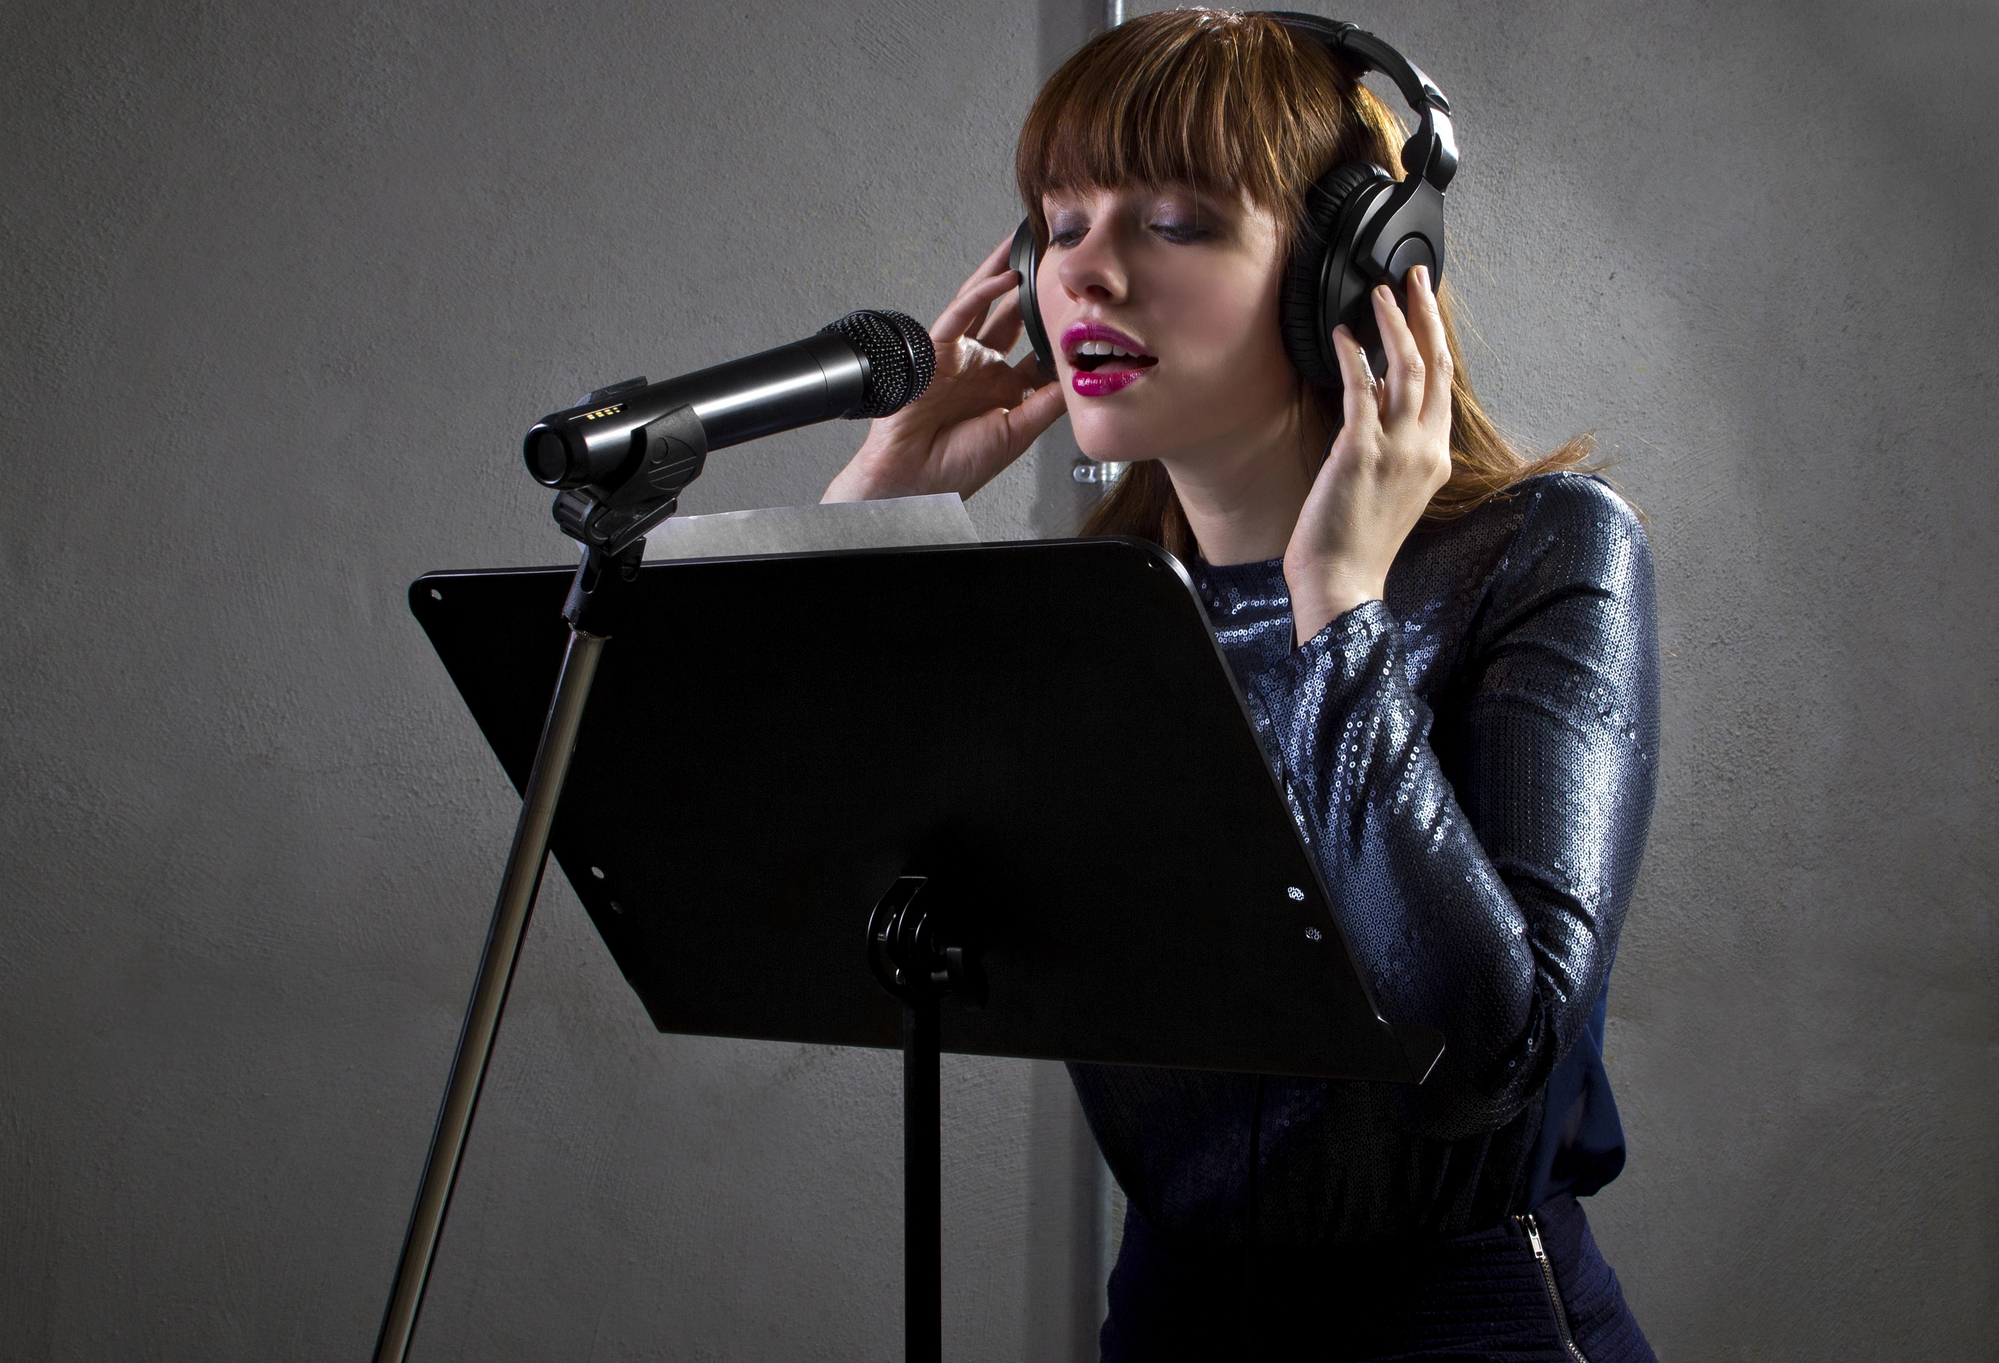 Female professional singer/songwriter in headphones singing into a microphone with a music stand in front, against a dark background